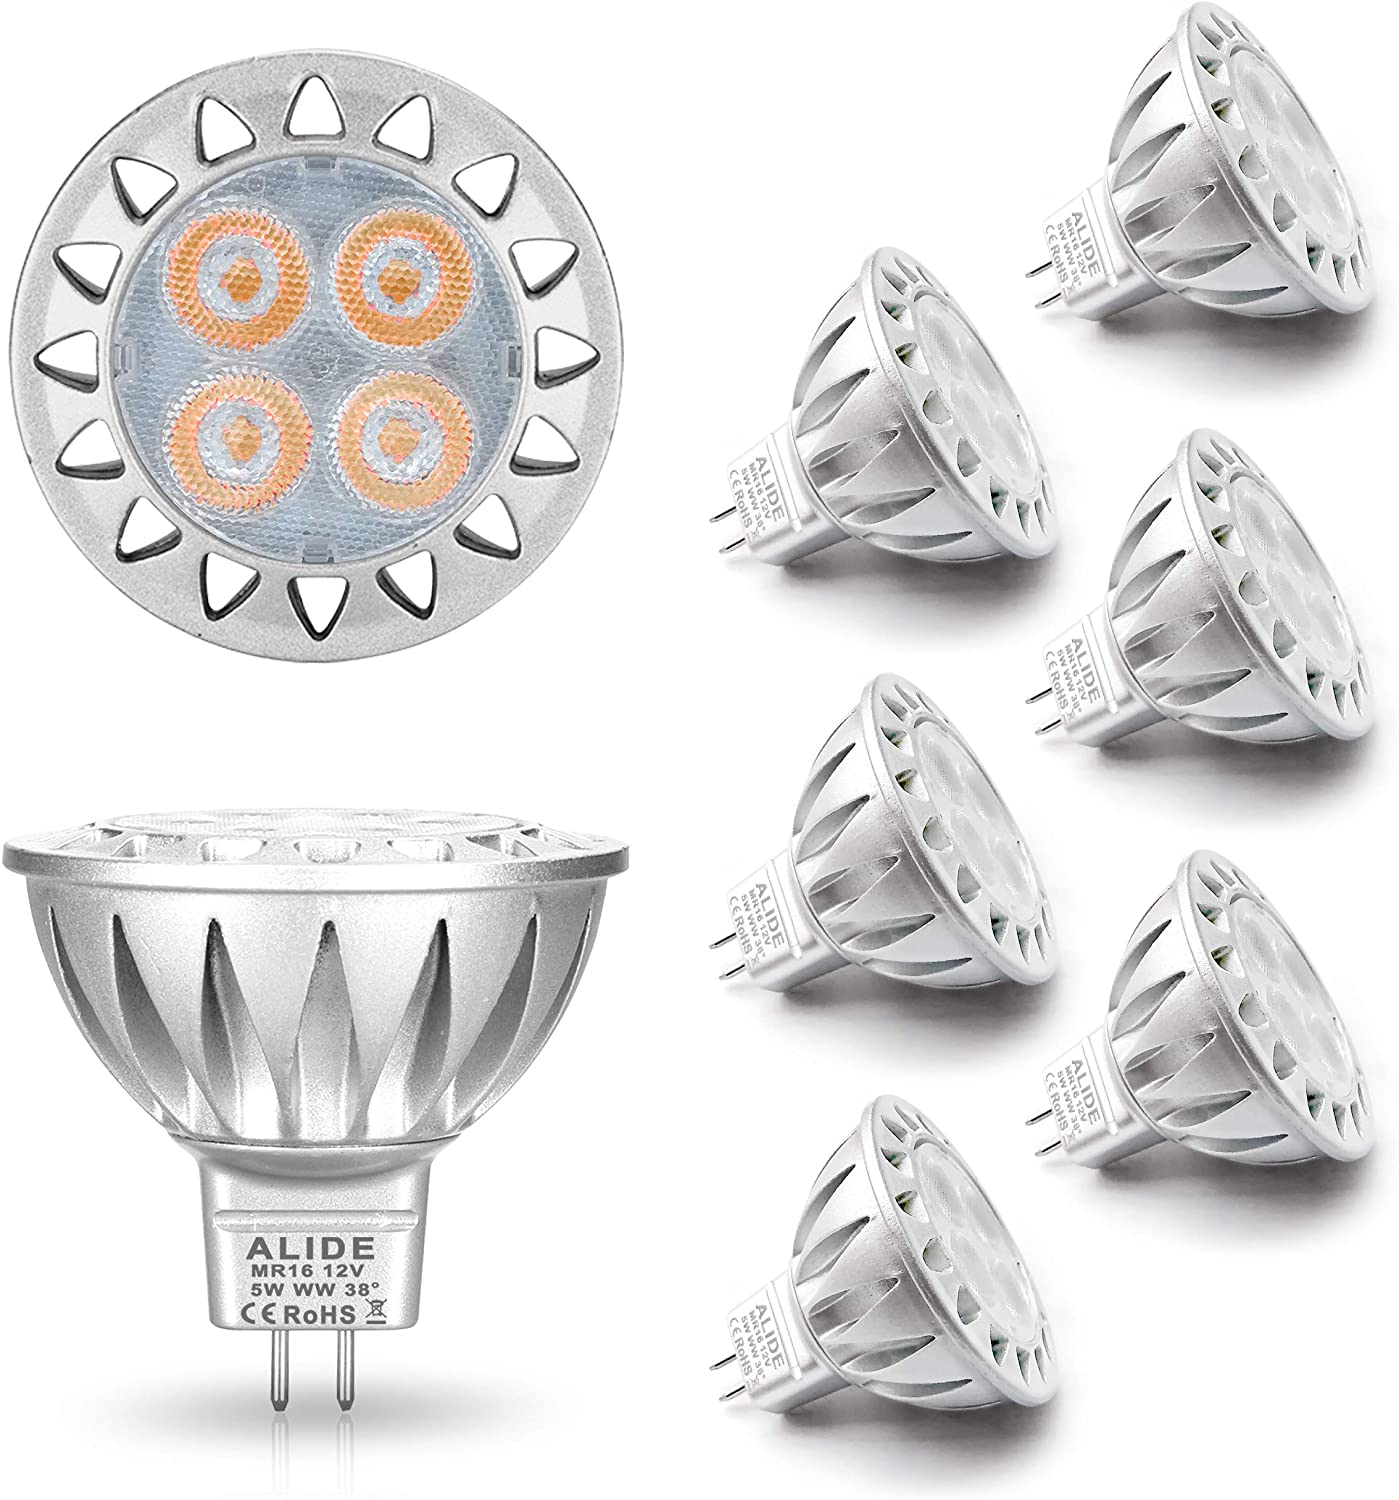 ALIDE MR16 Led Bulbs 5W Replace 20W 35W Halogen Equivalent